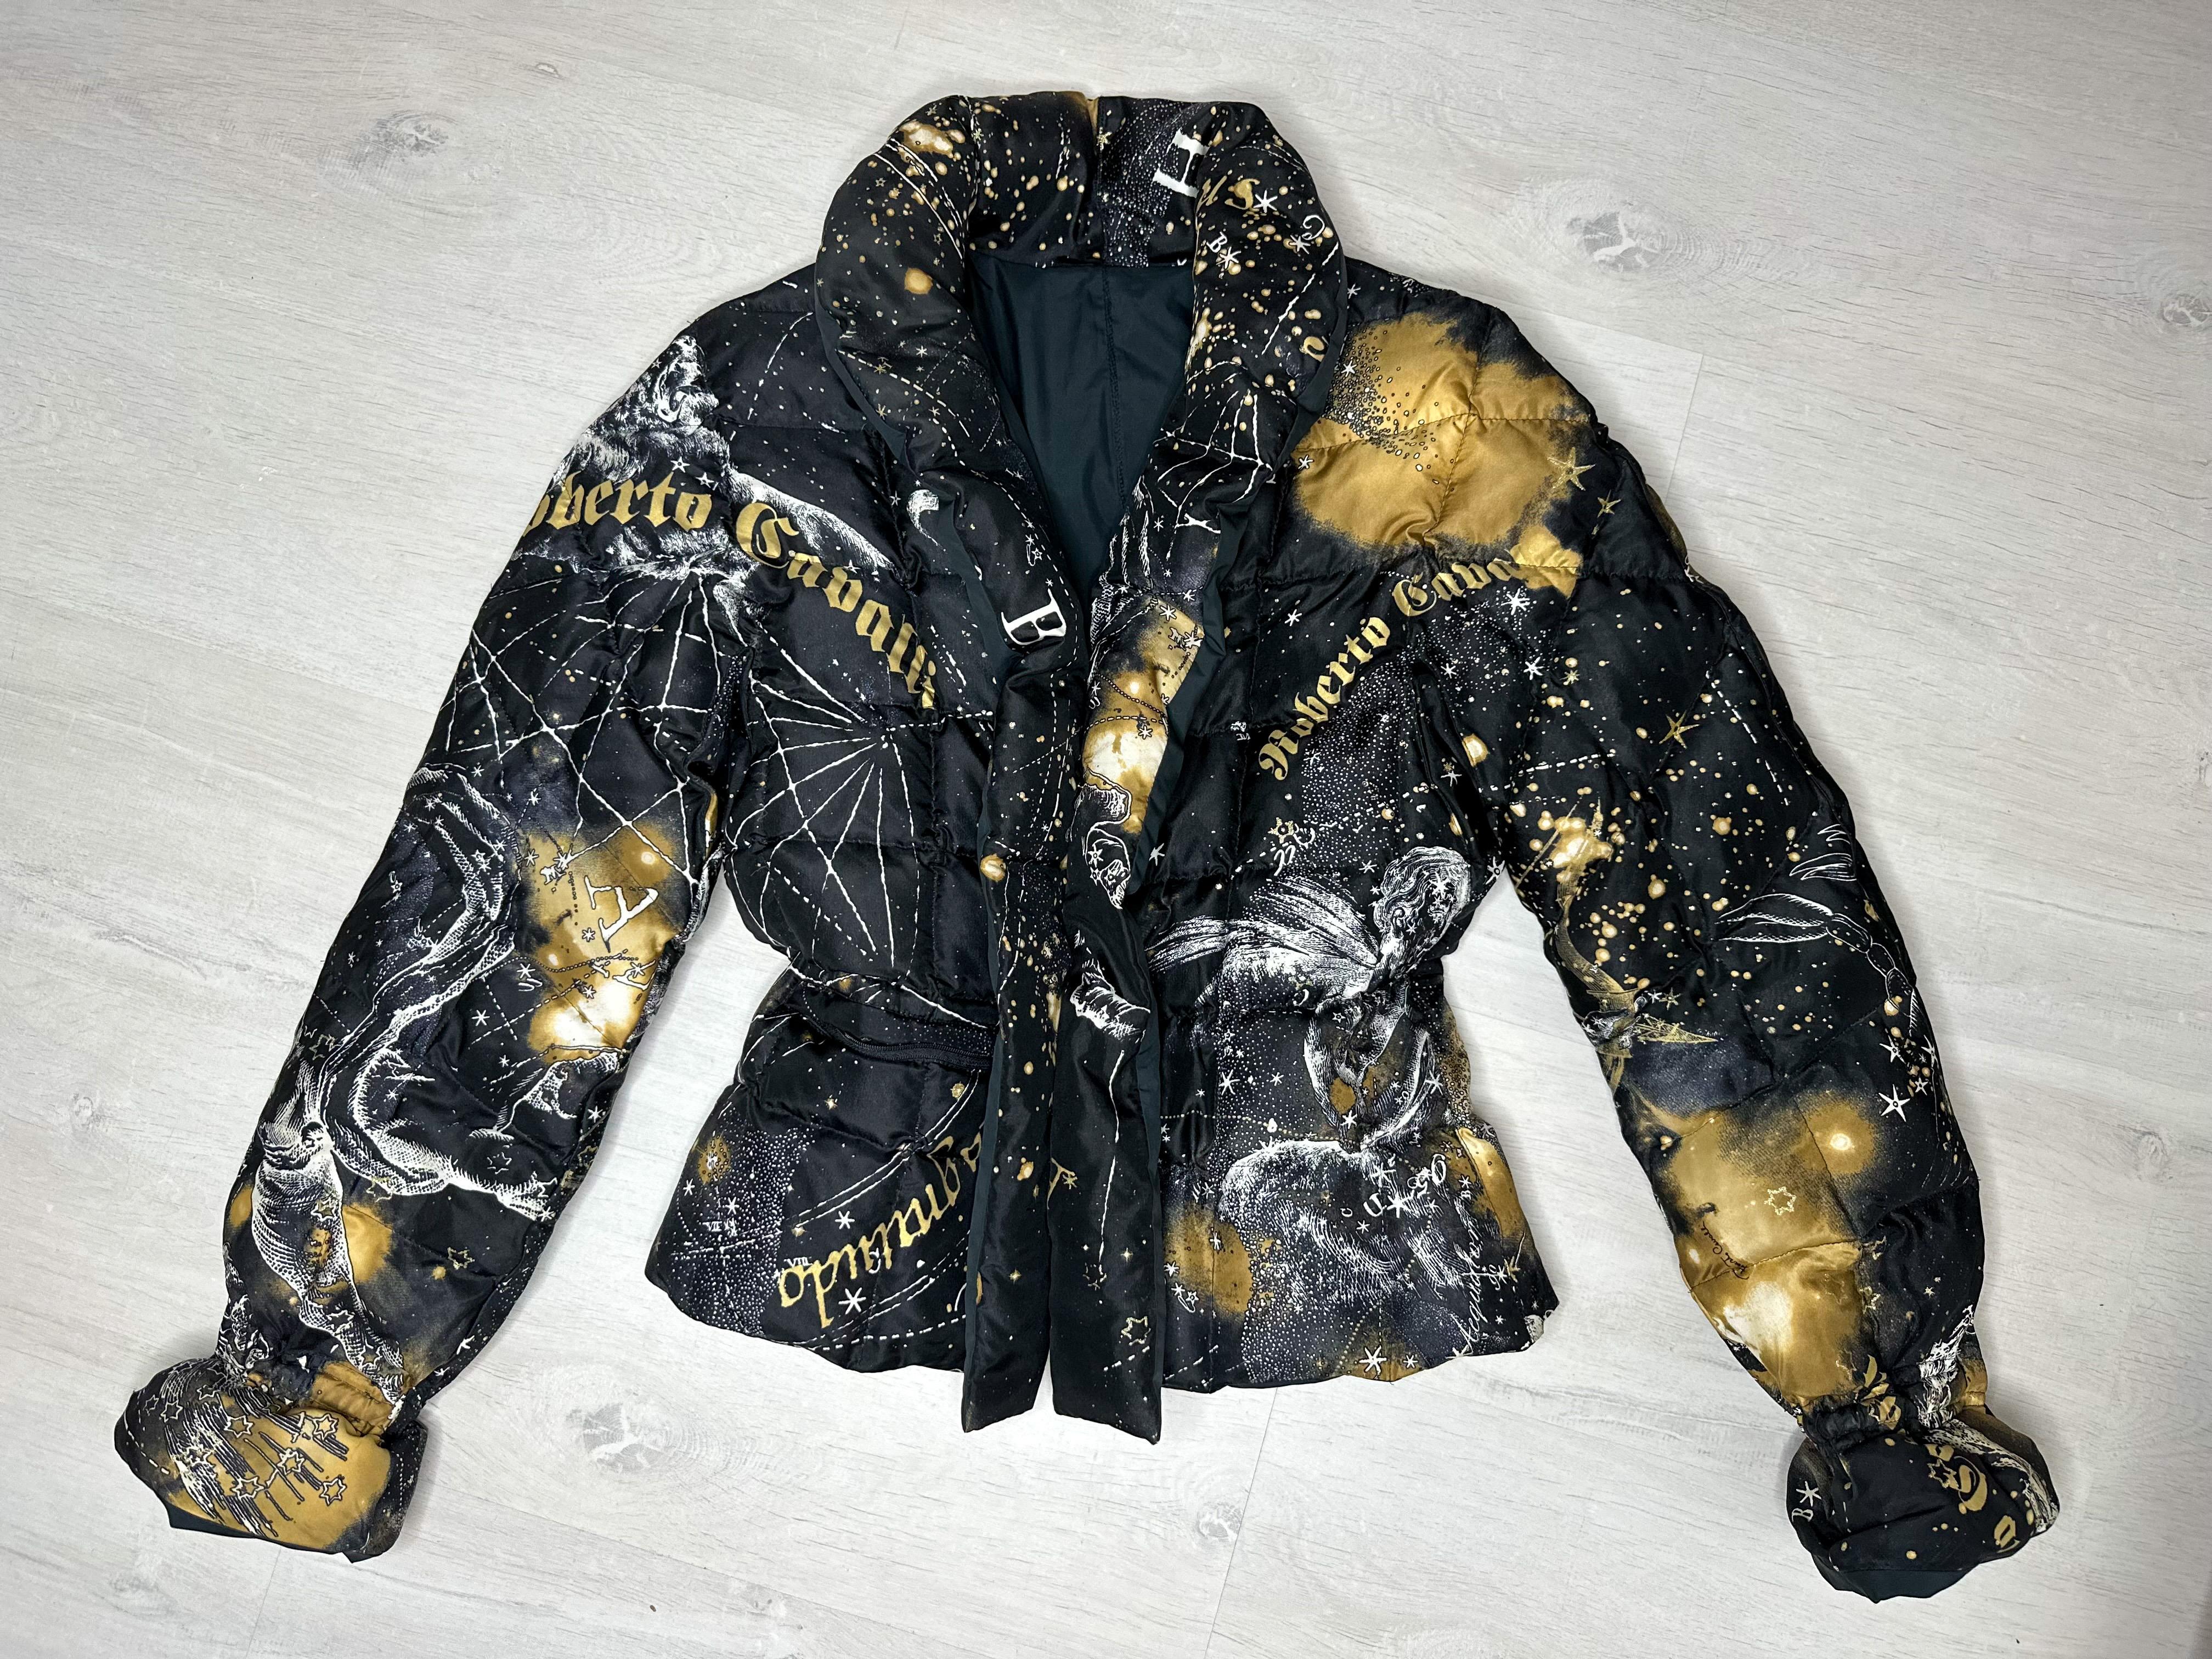 Roberto Cavalli 2003 constellation jacket In Good Condition For Sale In Annandale, VA